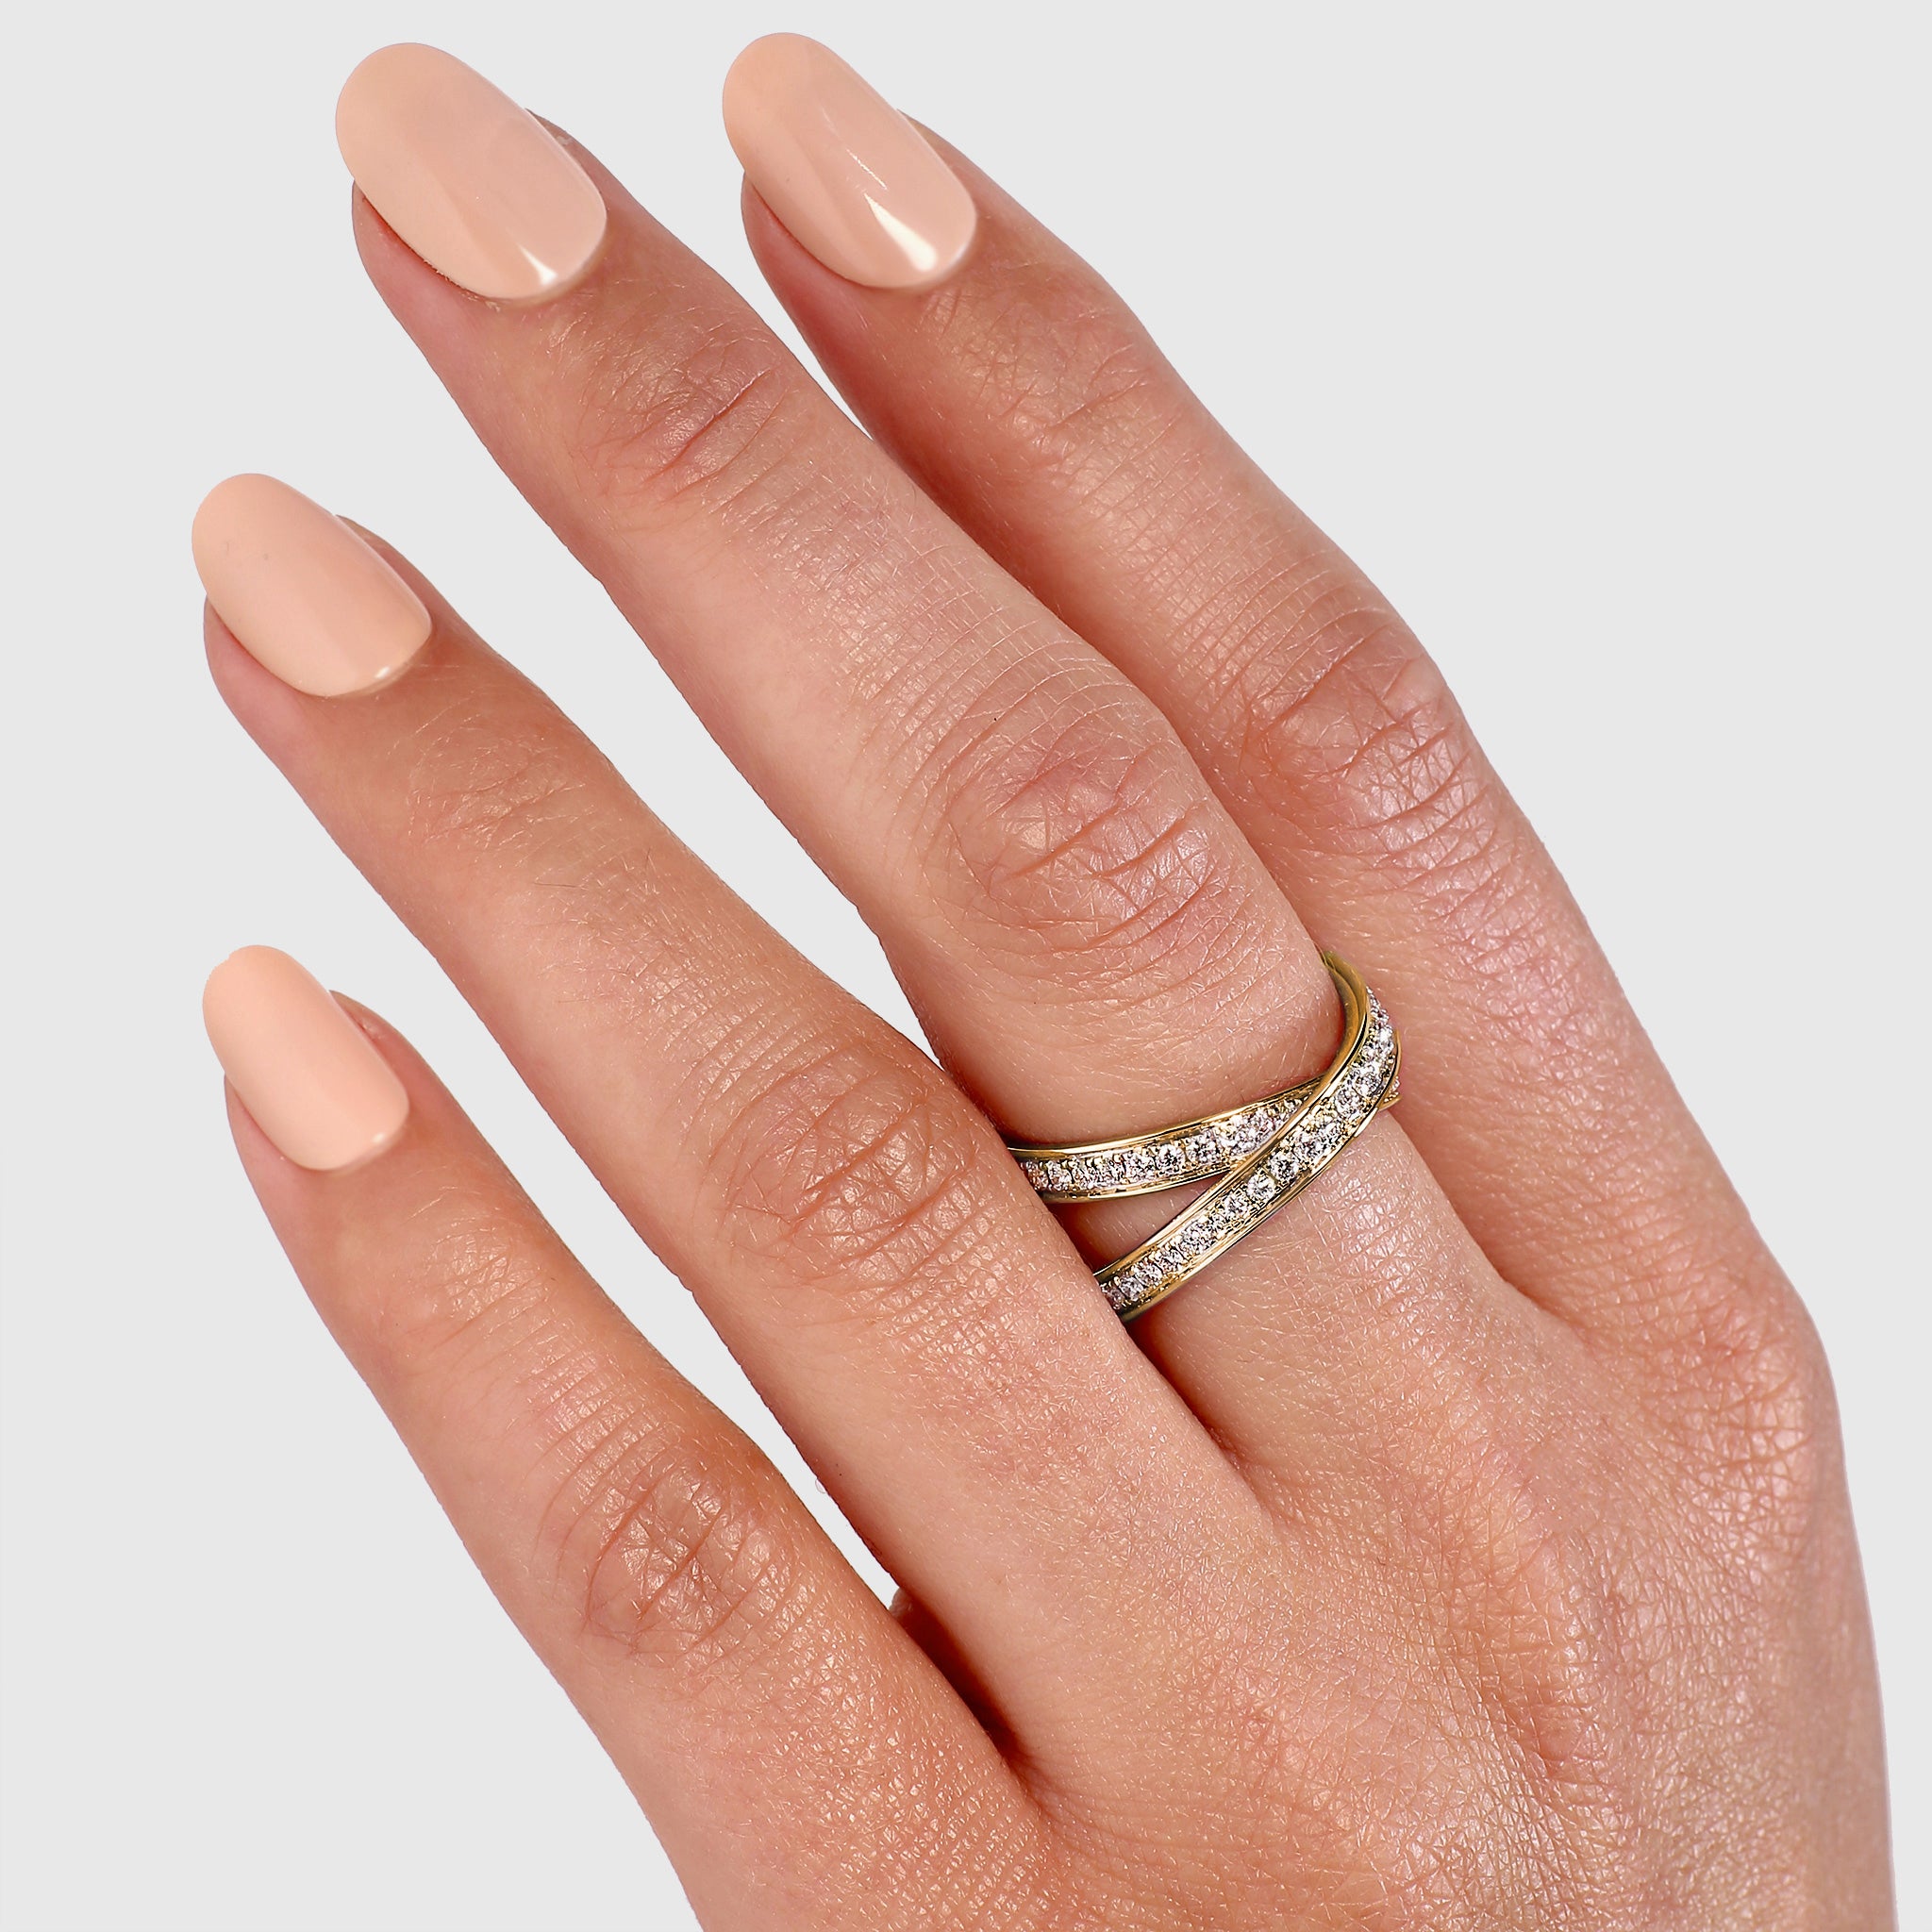 Shimansky - Women Wearing the Infinity Classic Pavé Diamond Ring Crafted in 18K Yellow Gold